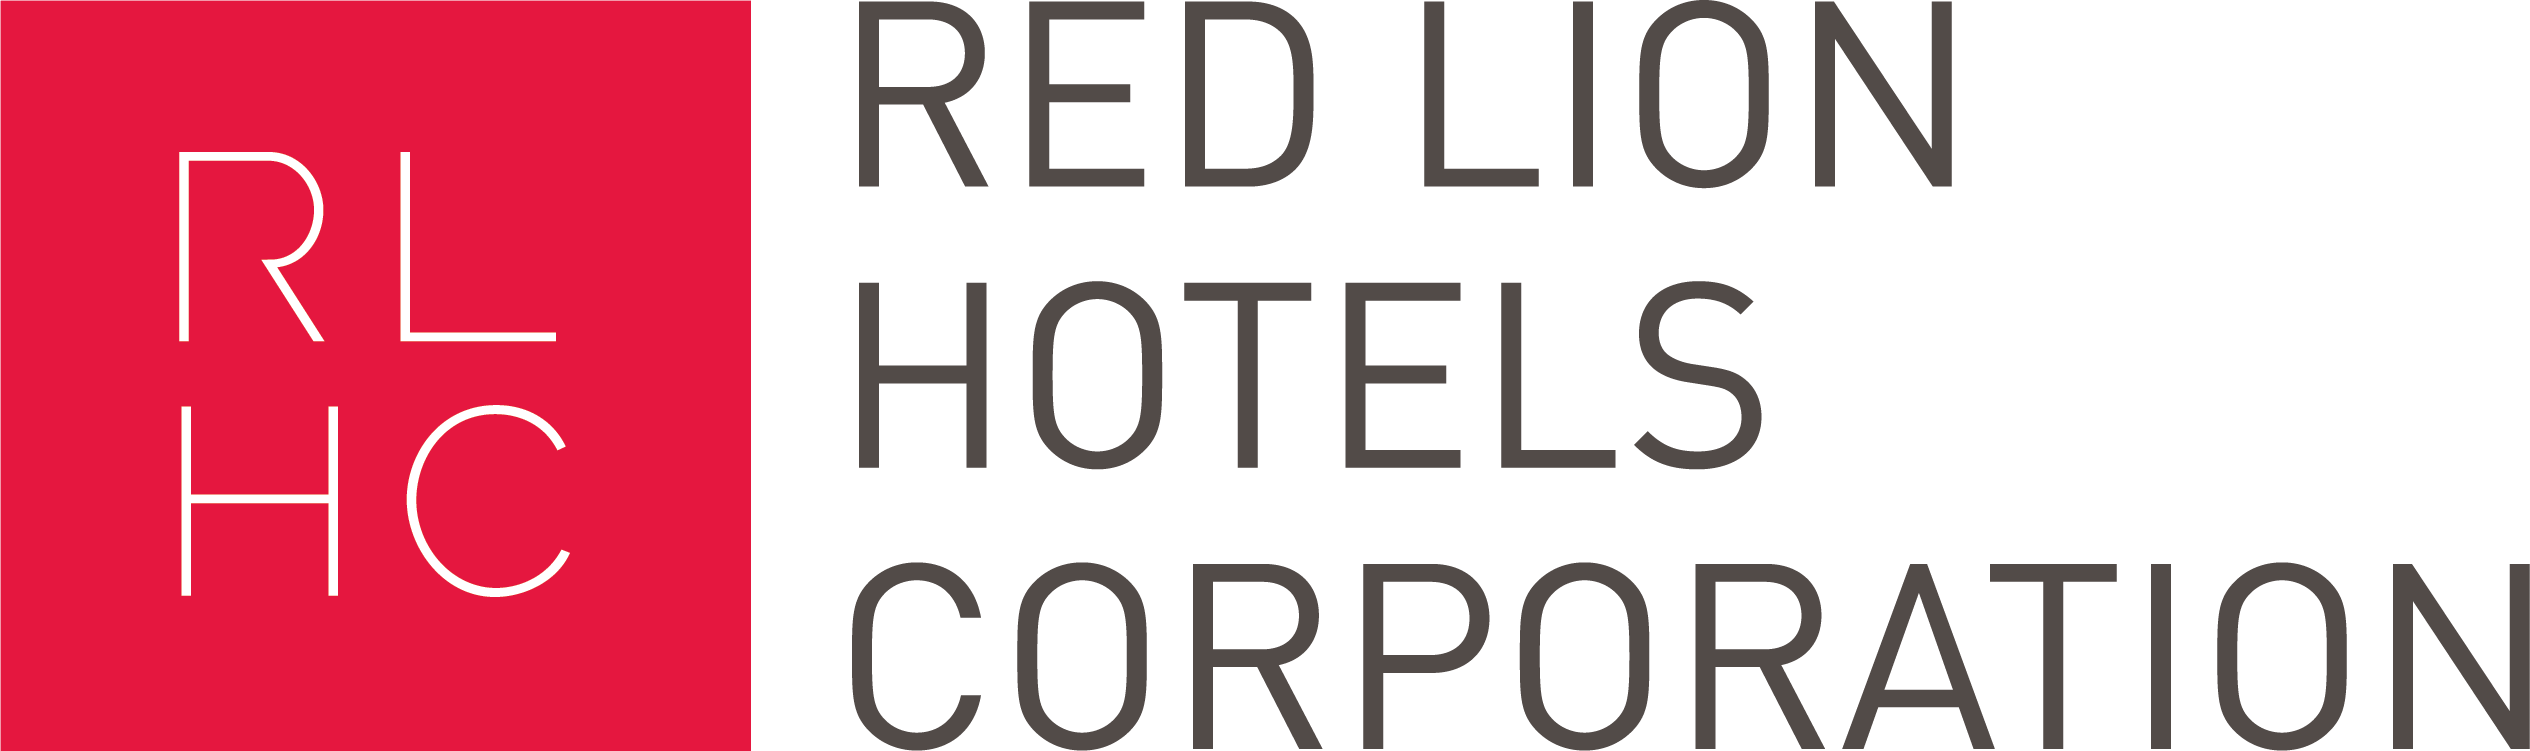 Red Lion Hotel Corp Logo - Red Lion Hotels Corp logo - No Vacancy